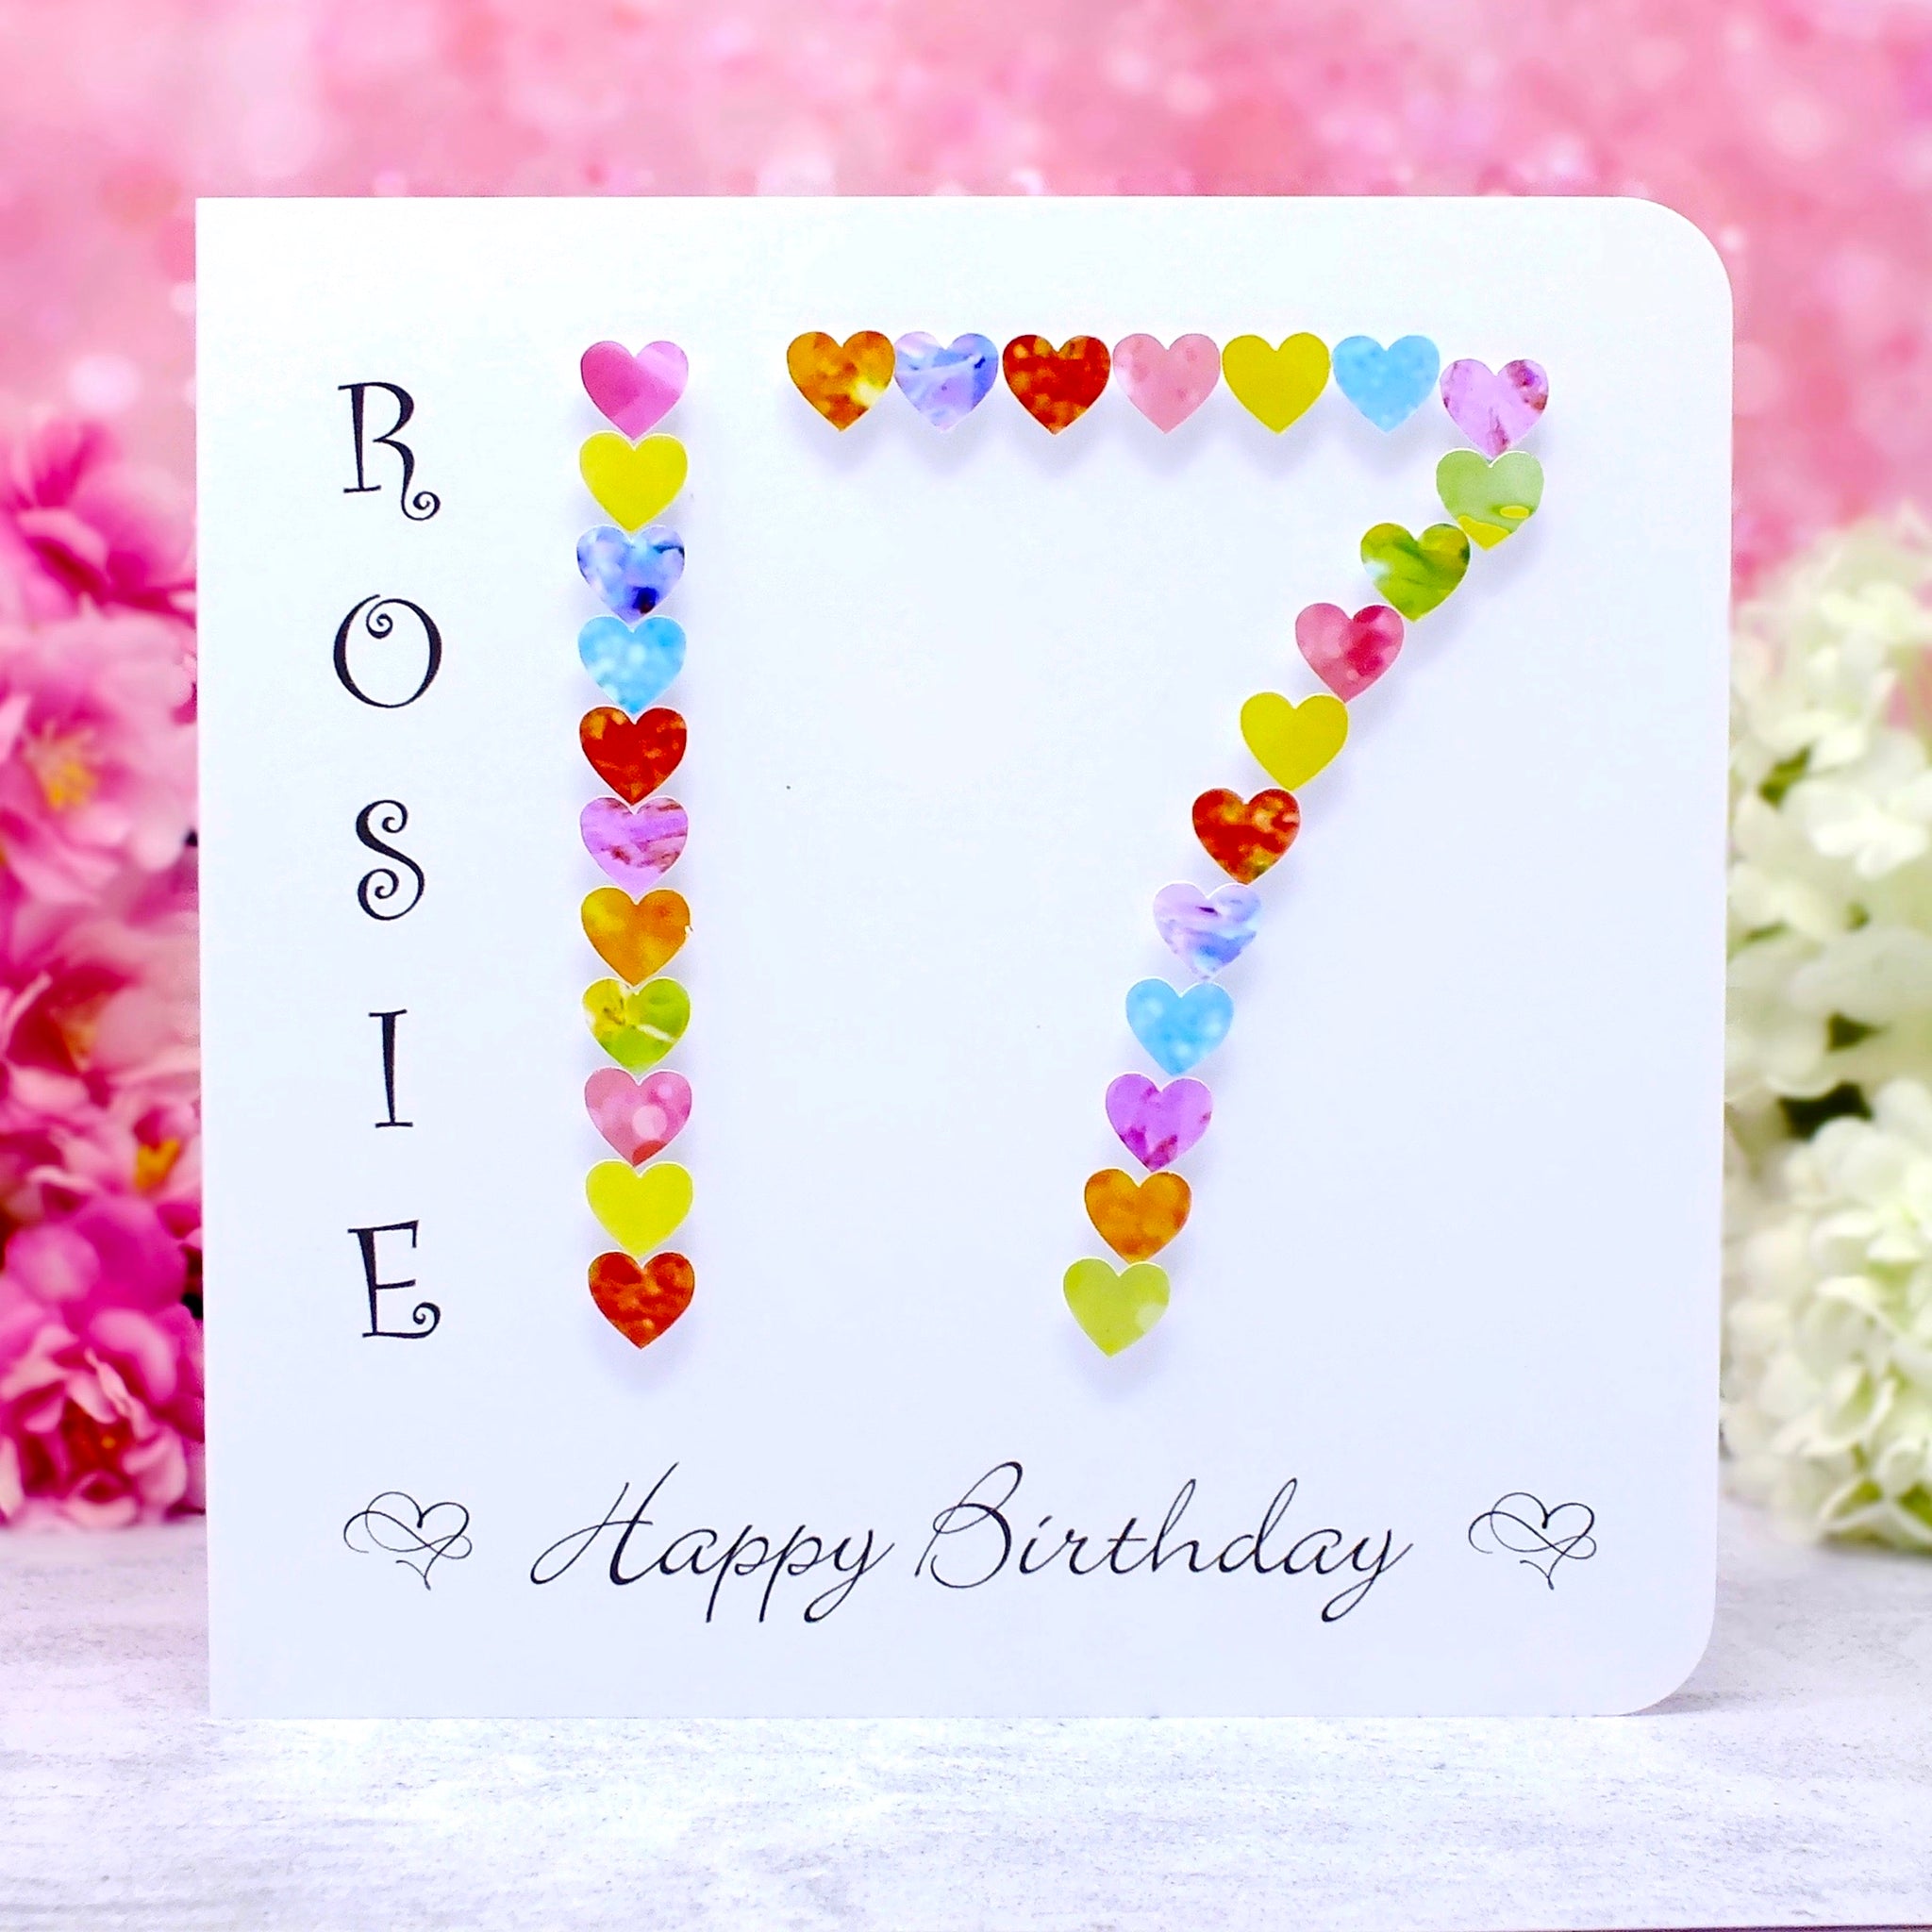 Personalized 17th Birthday Card with Vibrant Hearts - Handmade and Unique | Bright Heart Design